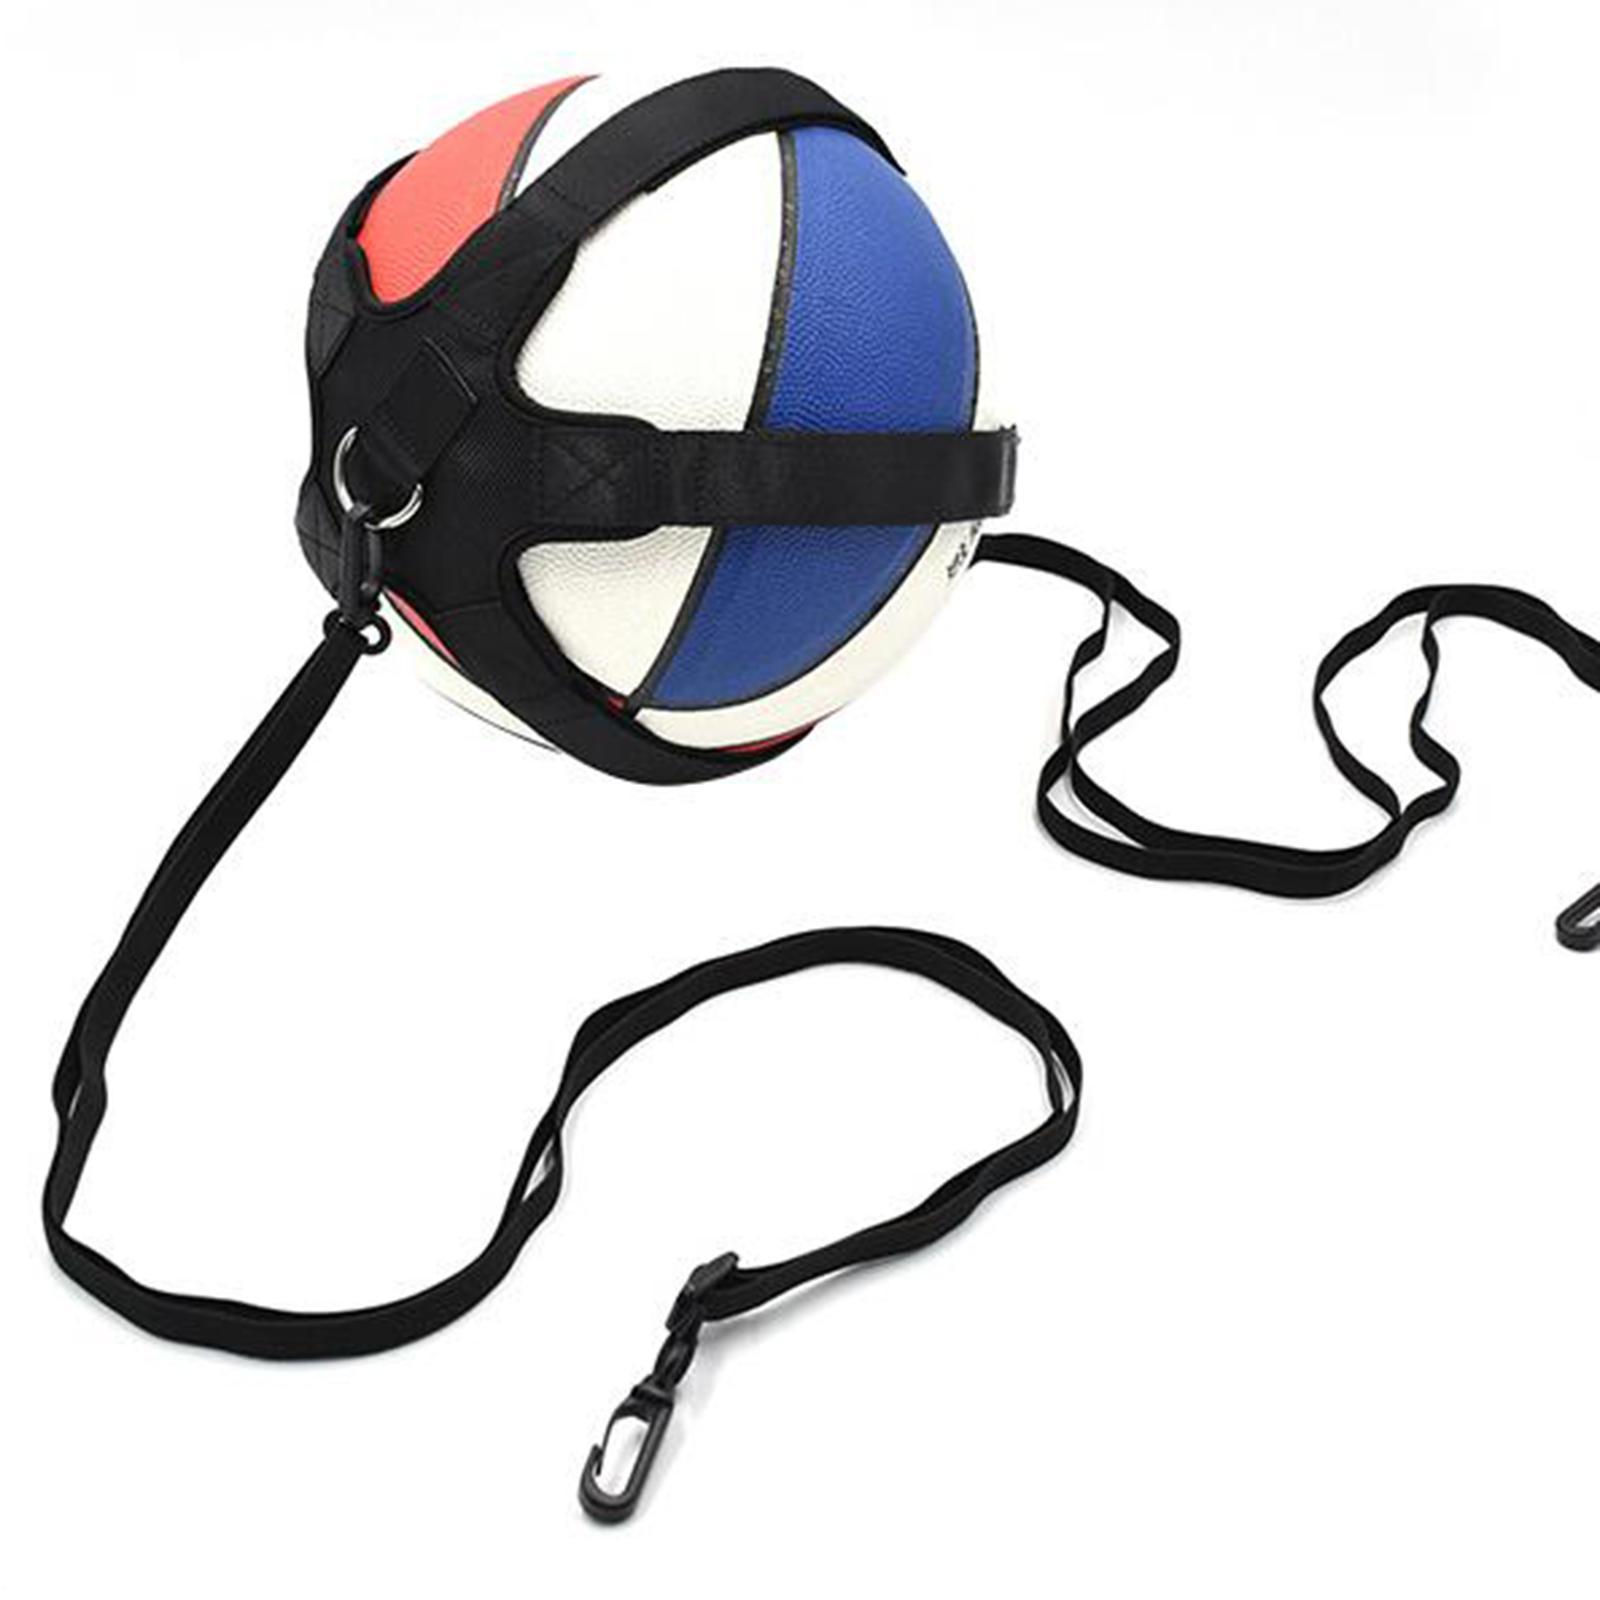 Volleyball Training Equipment Adjustable Training Belt for Beginners Playing